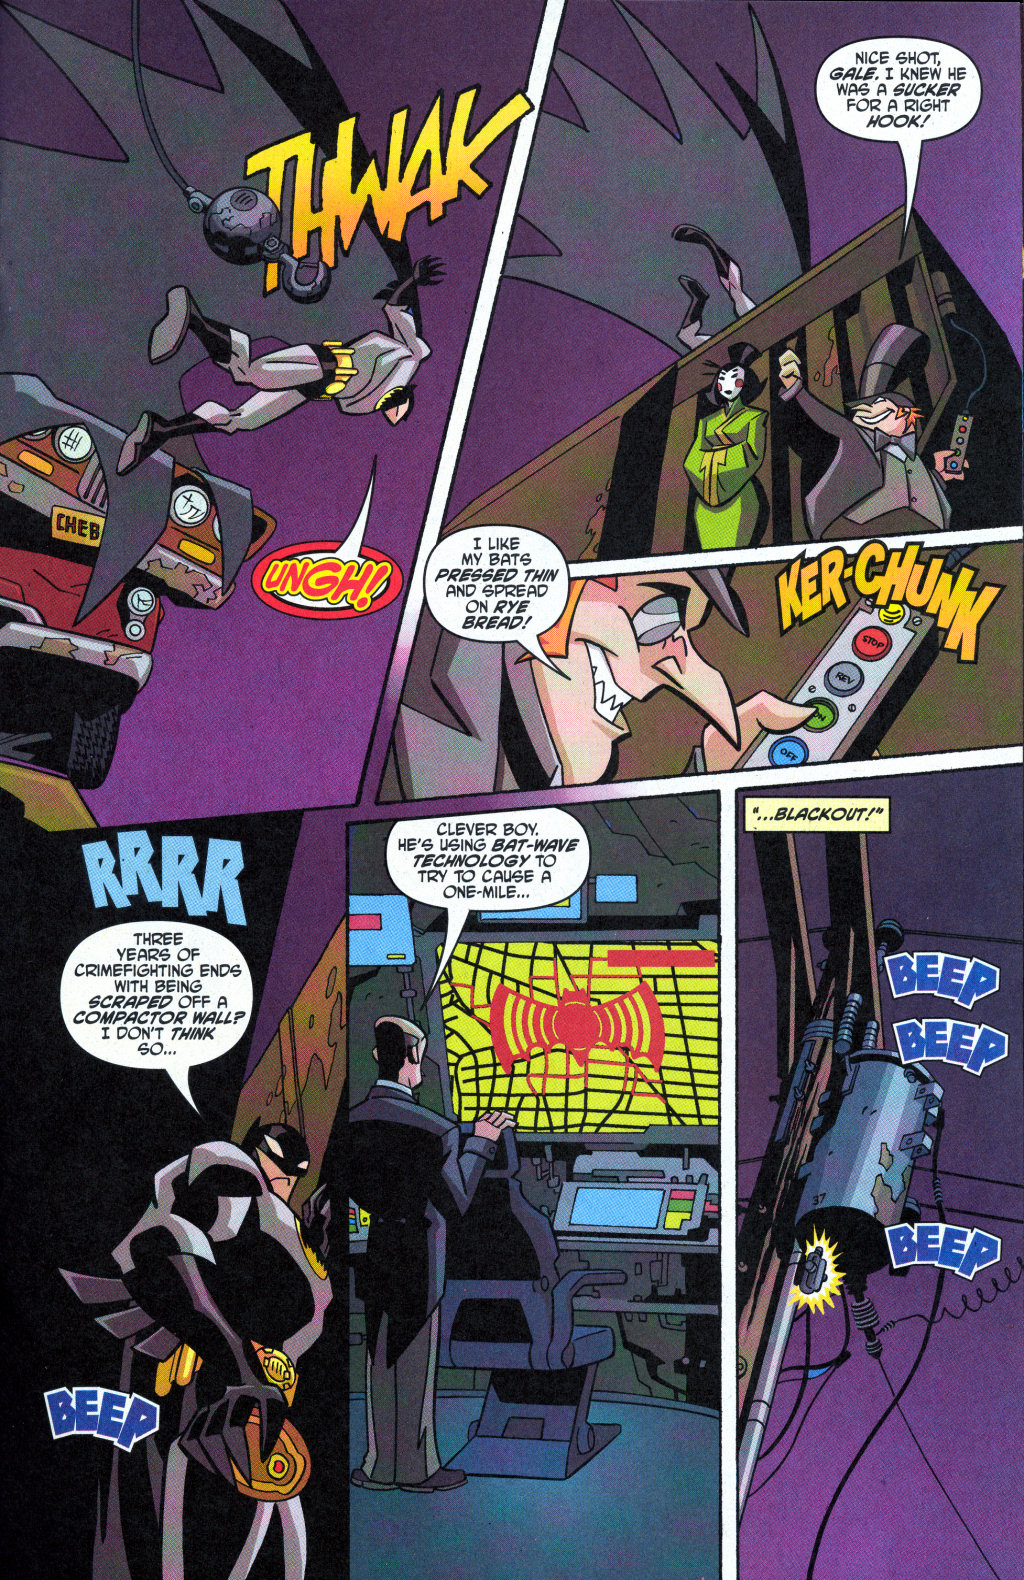 The Batman Strikes! issue 1 (Burger King Giveaway Edition) - Page 17